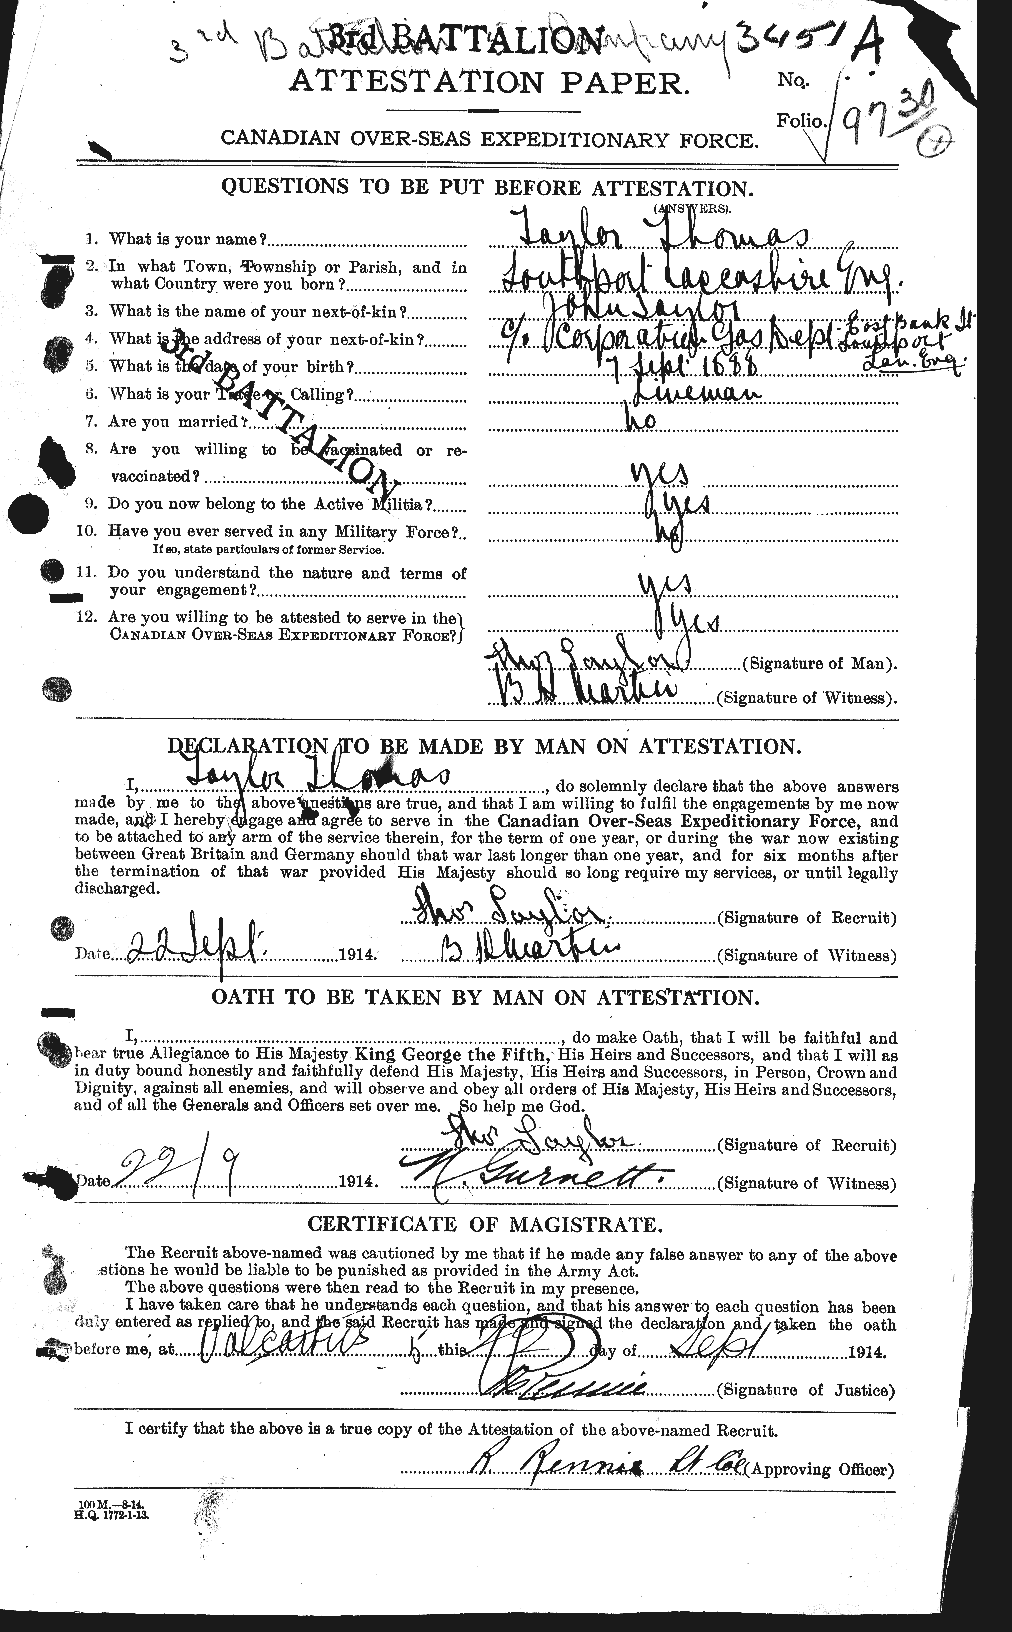 Personnel Records of the First World War - CEF 627952a